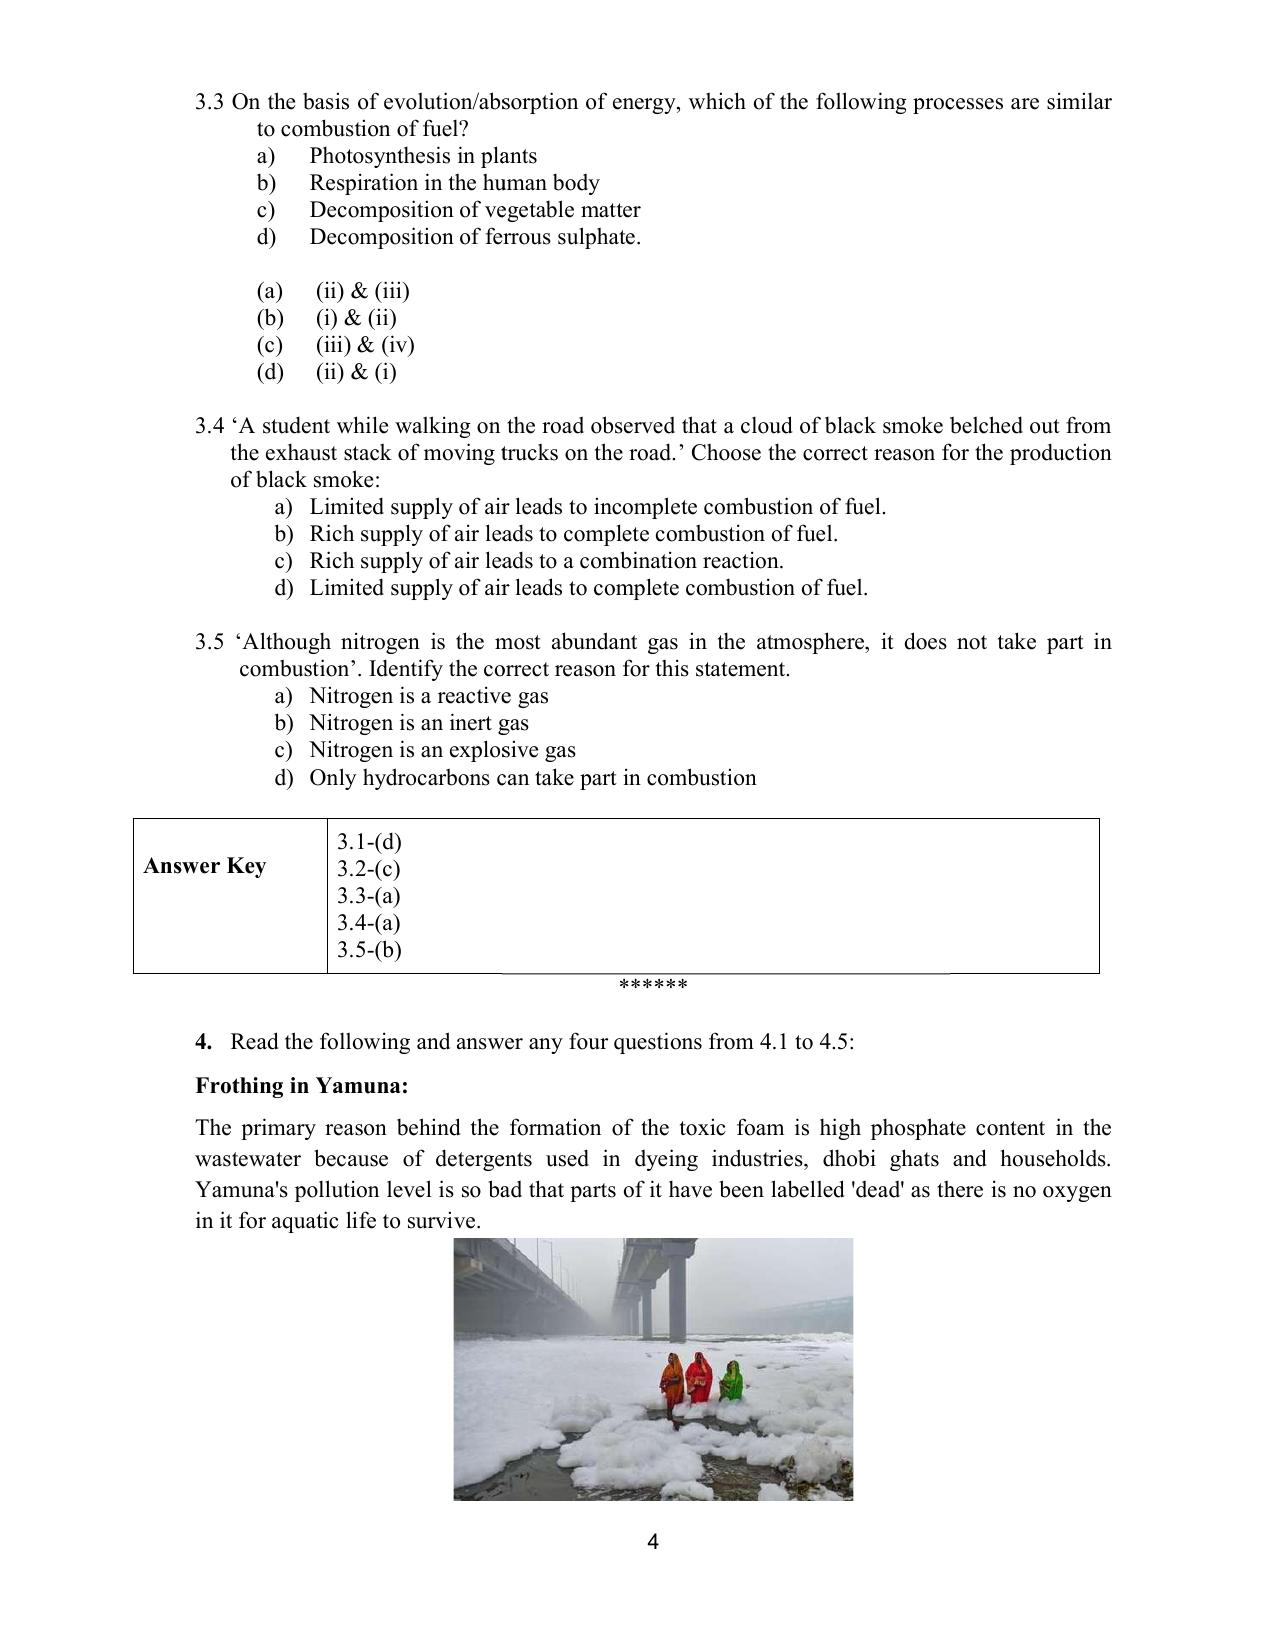 CBSE Class 10 Science Question Bank - Page 4